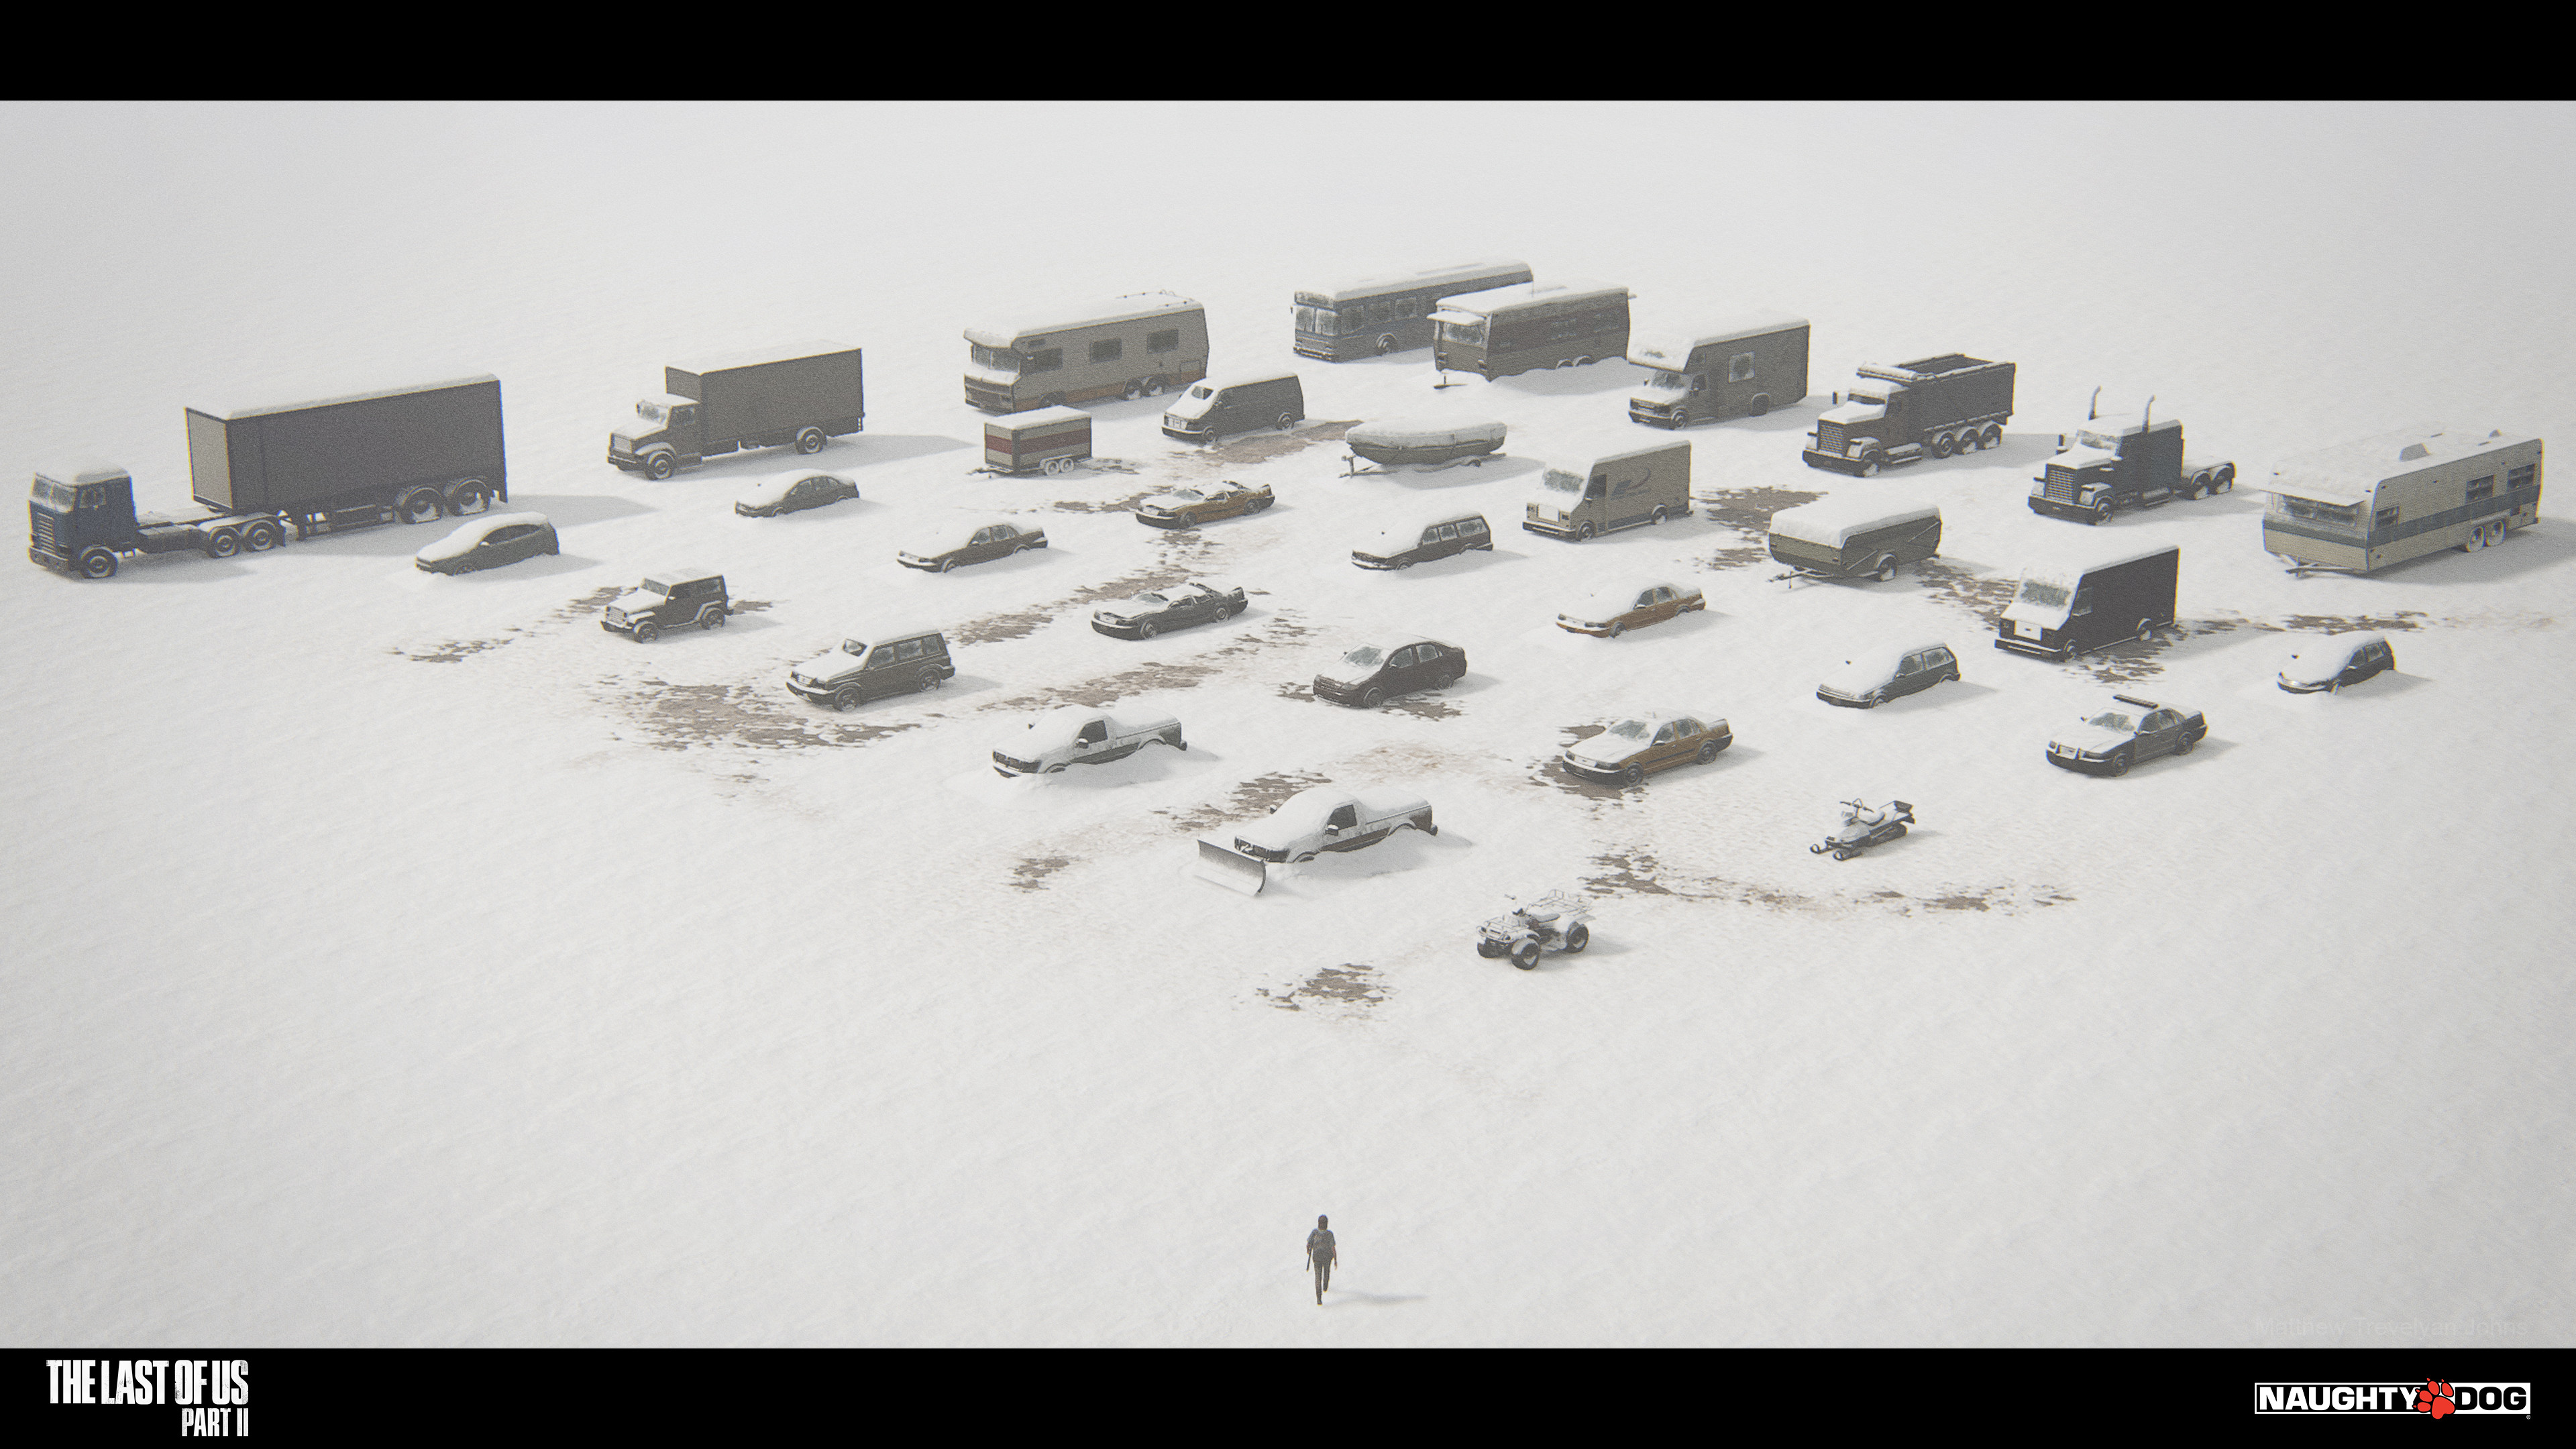 A snow vehicle test level that I created, there are a few missing here but this is the majority of snow covered vehicles that features in The Last of Us: Part II